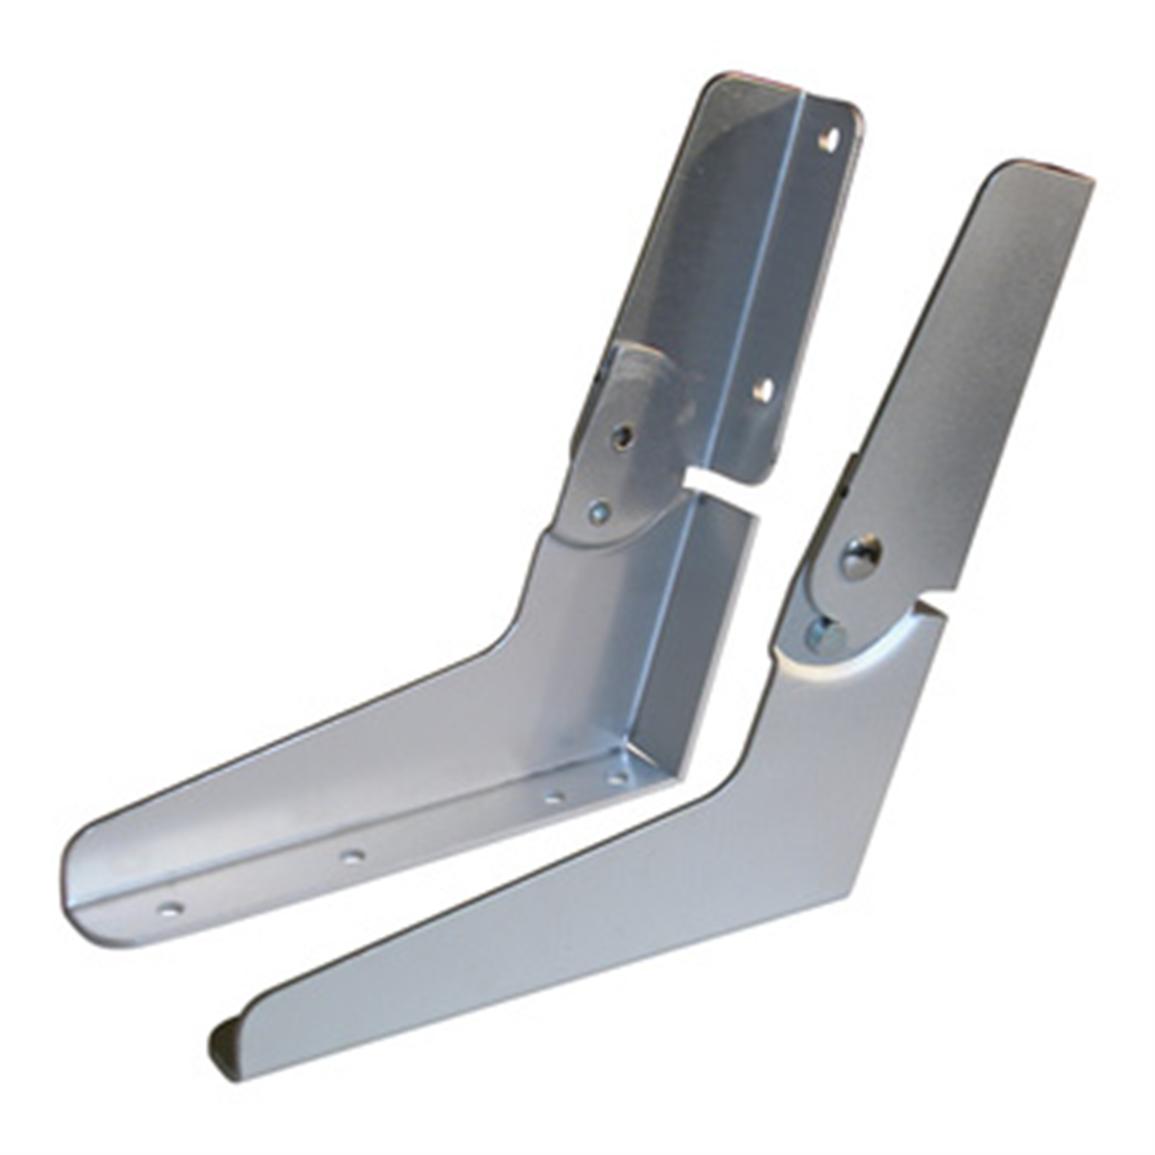 Wise® Folding Seat Hinge - 171756, Boat Seat Accessories at Sportsman's